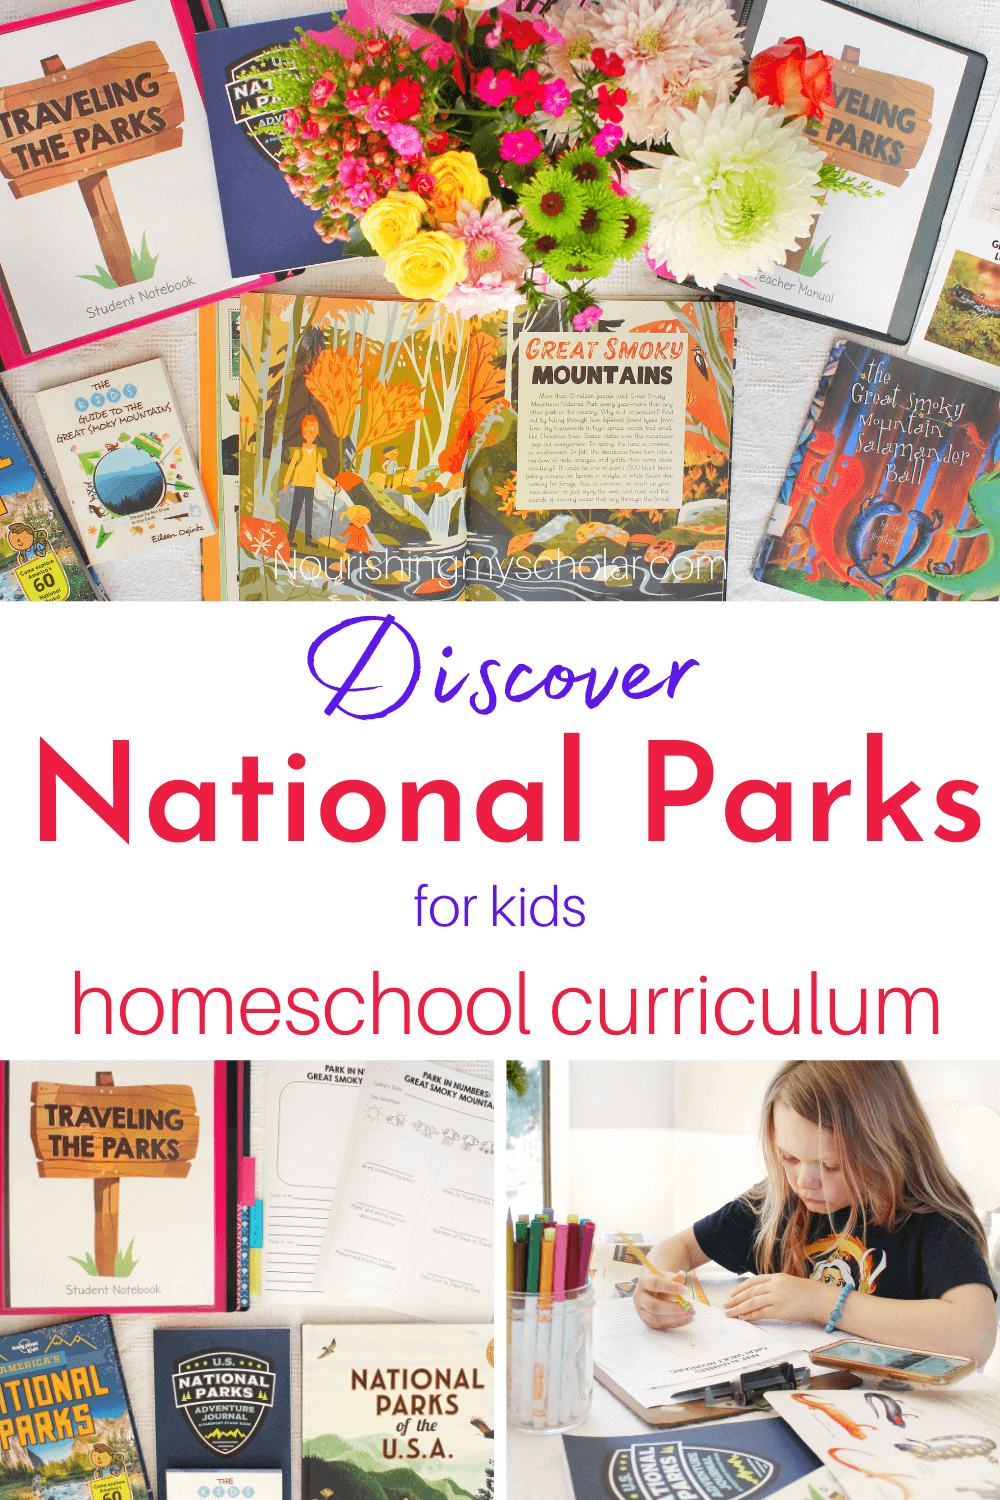 Discover National Parks for Kids: Discover the fantastic national parks of our country without ever leaving the comfort of your own home unless you want to. That's right, I've discovered a curriculum that will take you and your kid's trekking across the country to 60 of America's national parks! #nationalparks #nationalparksforkids #homeschool #homeschooling #USAgeography #USAtravel #waldockwaytravelingthestates #travelingthestates